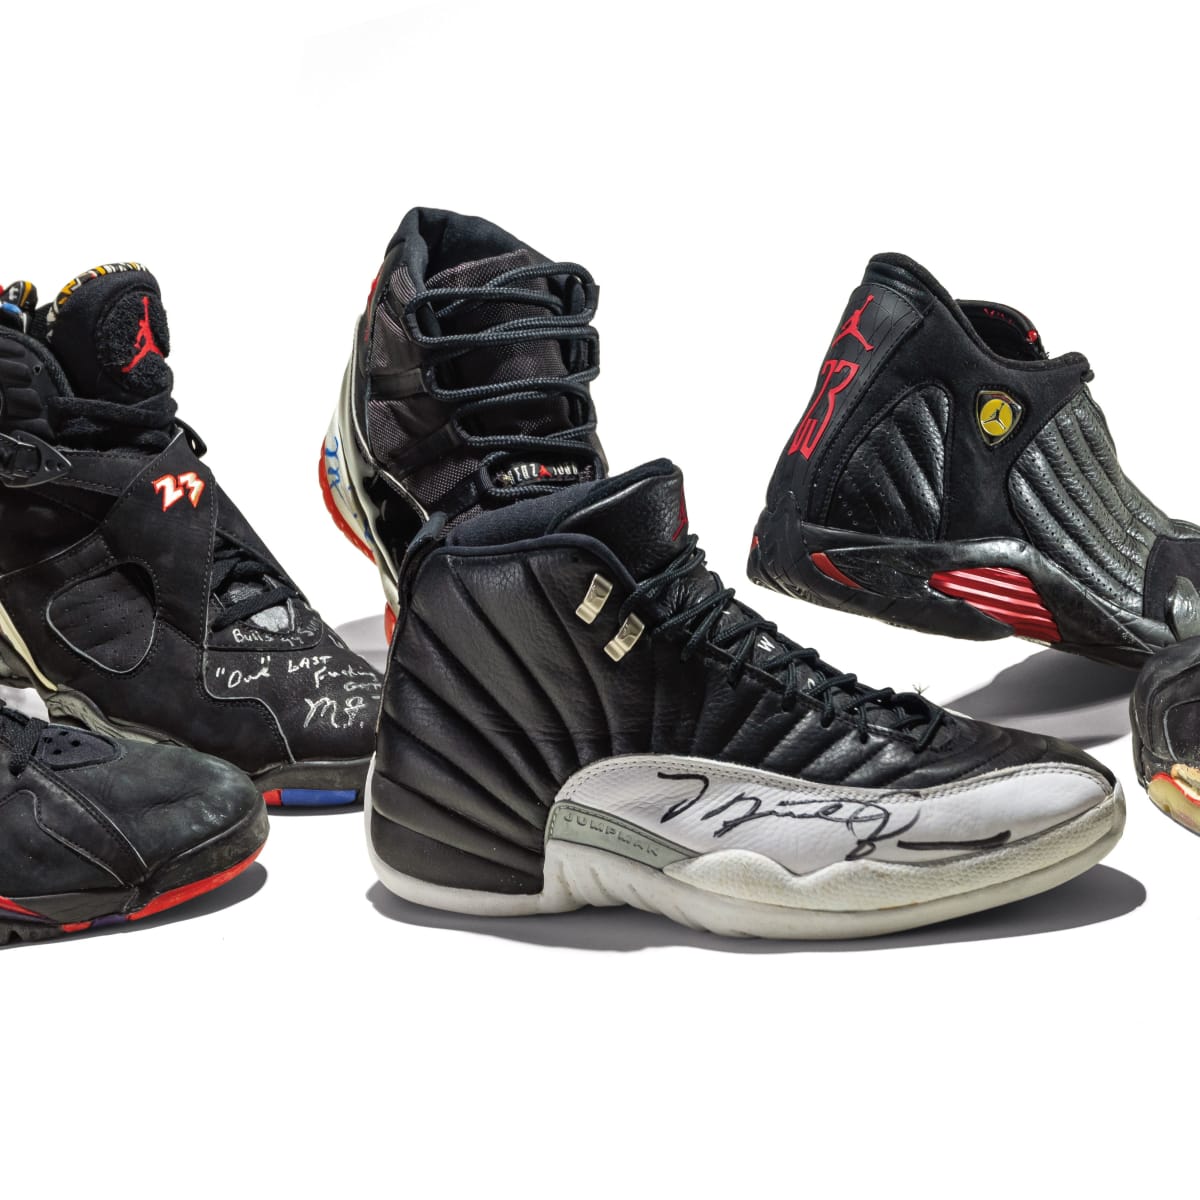 The 'holy grail' of sneakers: Michael Jordan's NBA Finals trainers are for  sale – 6 pairs of Air Jordan shoes from the elite 'Dynasty Collection' are  expected to sell for millions at